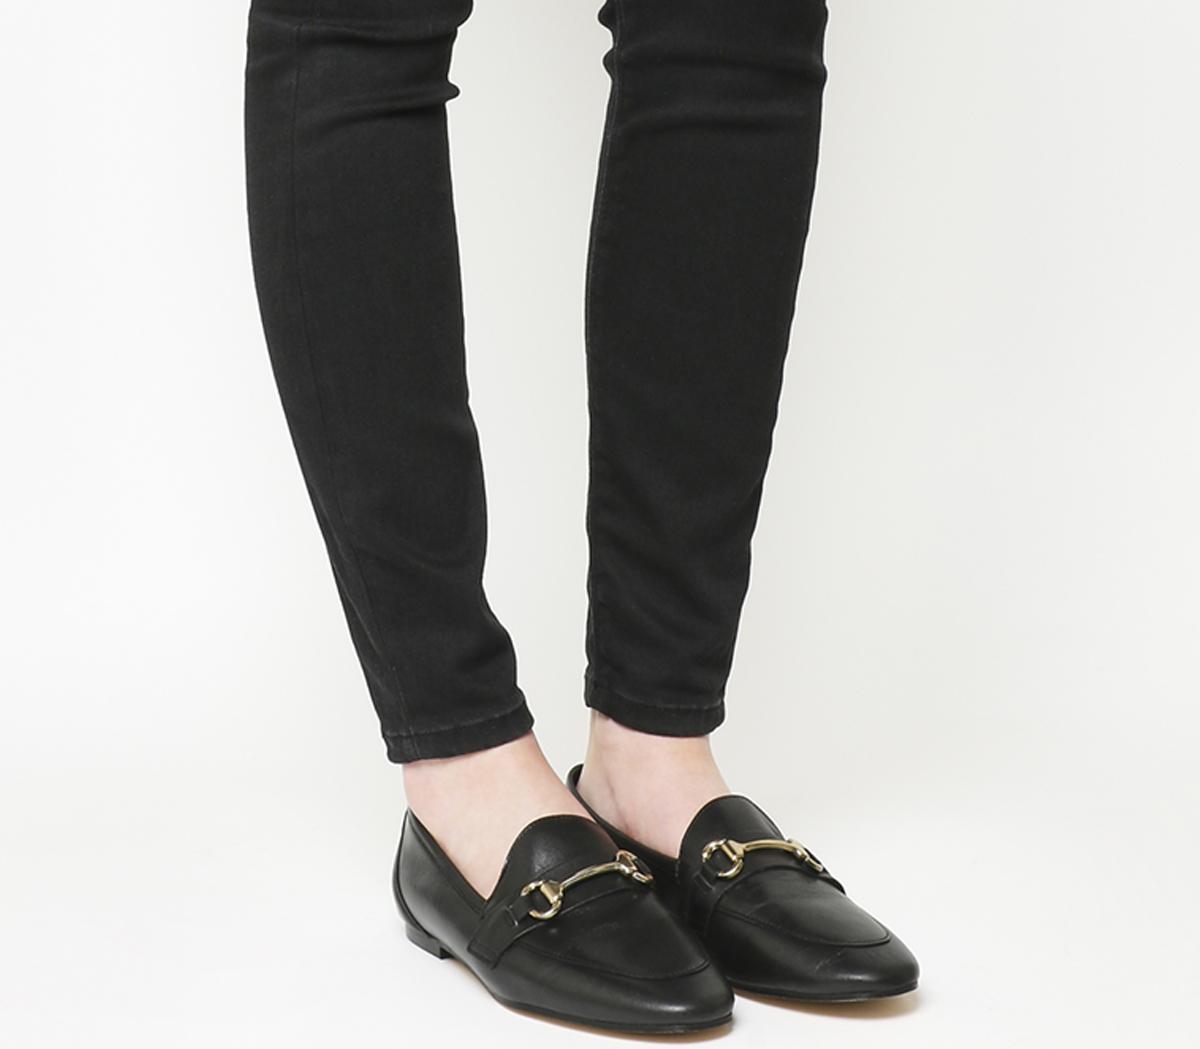 OFFICEDestiny Trim LoaferBlack Leather